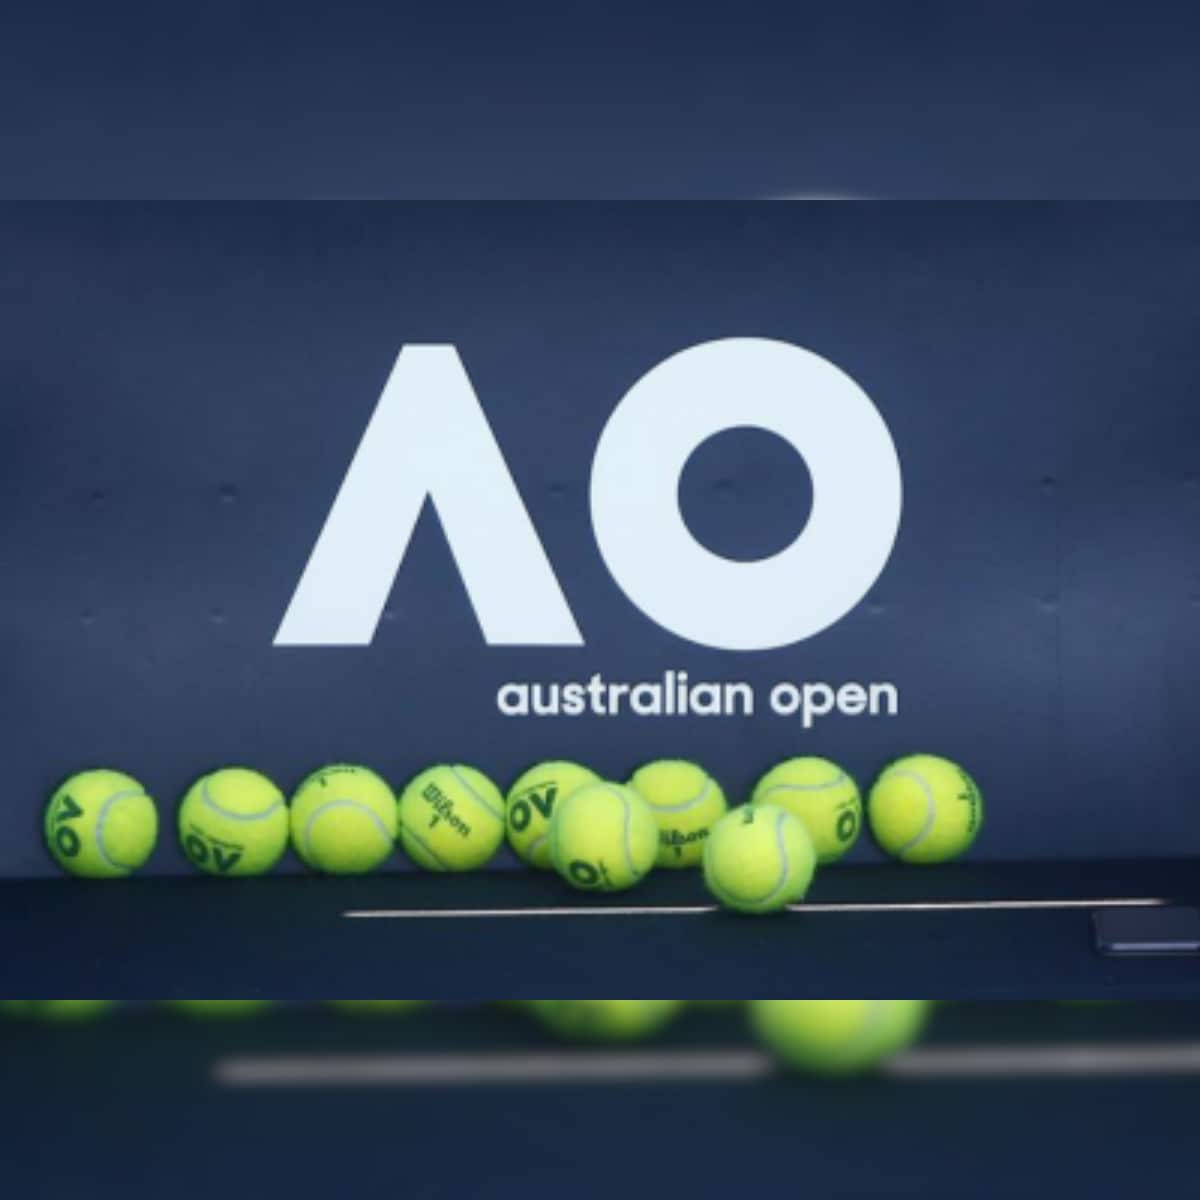 Australian Open 2021: Live Streaming, When, and How Watch; Need to Know